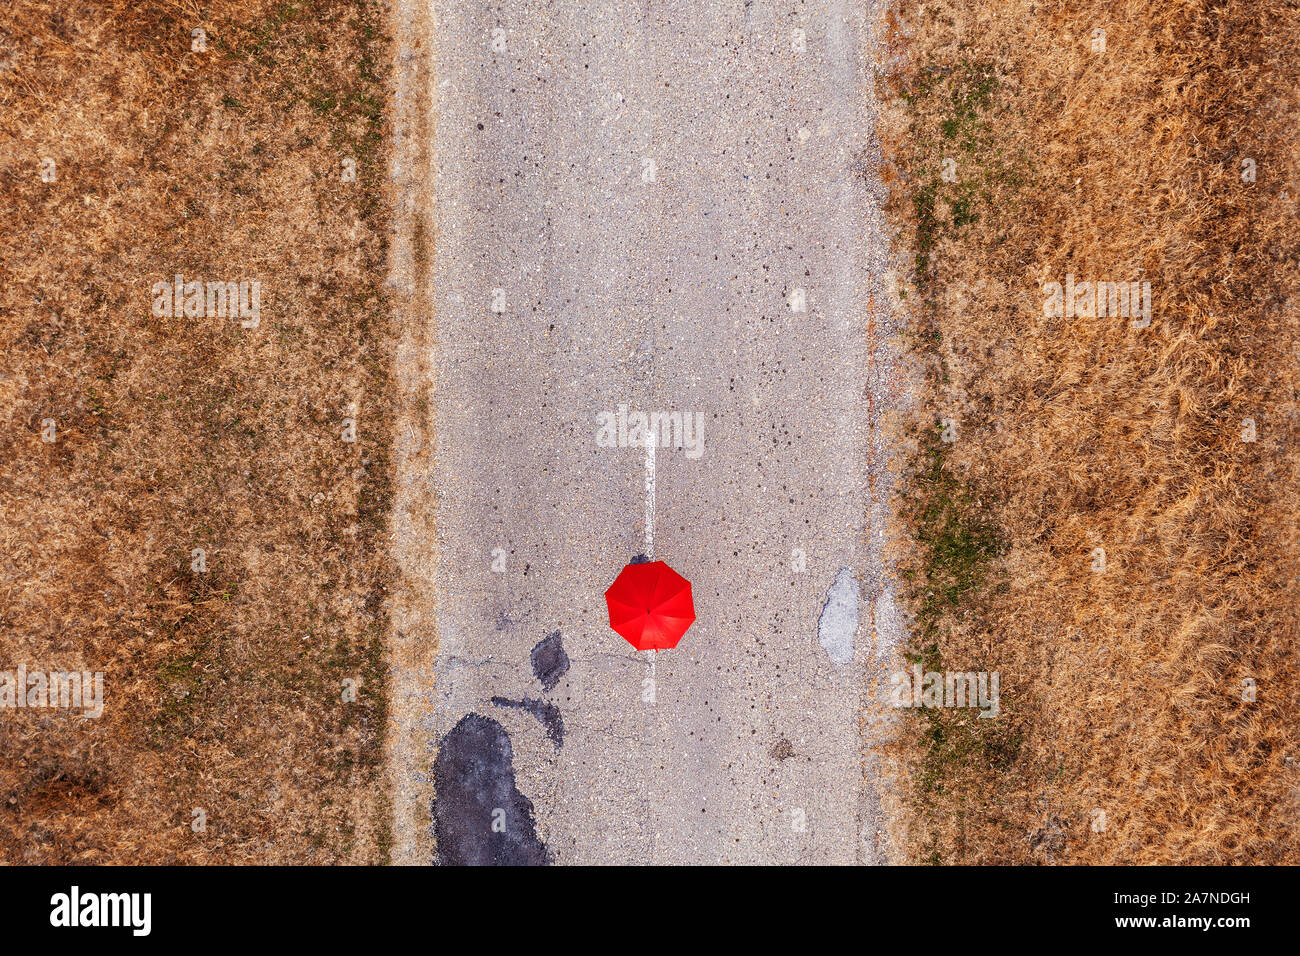 Red umbrella on road, top view from drone pov Stock Photo